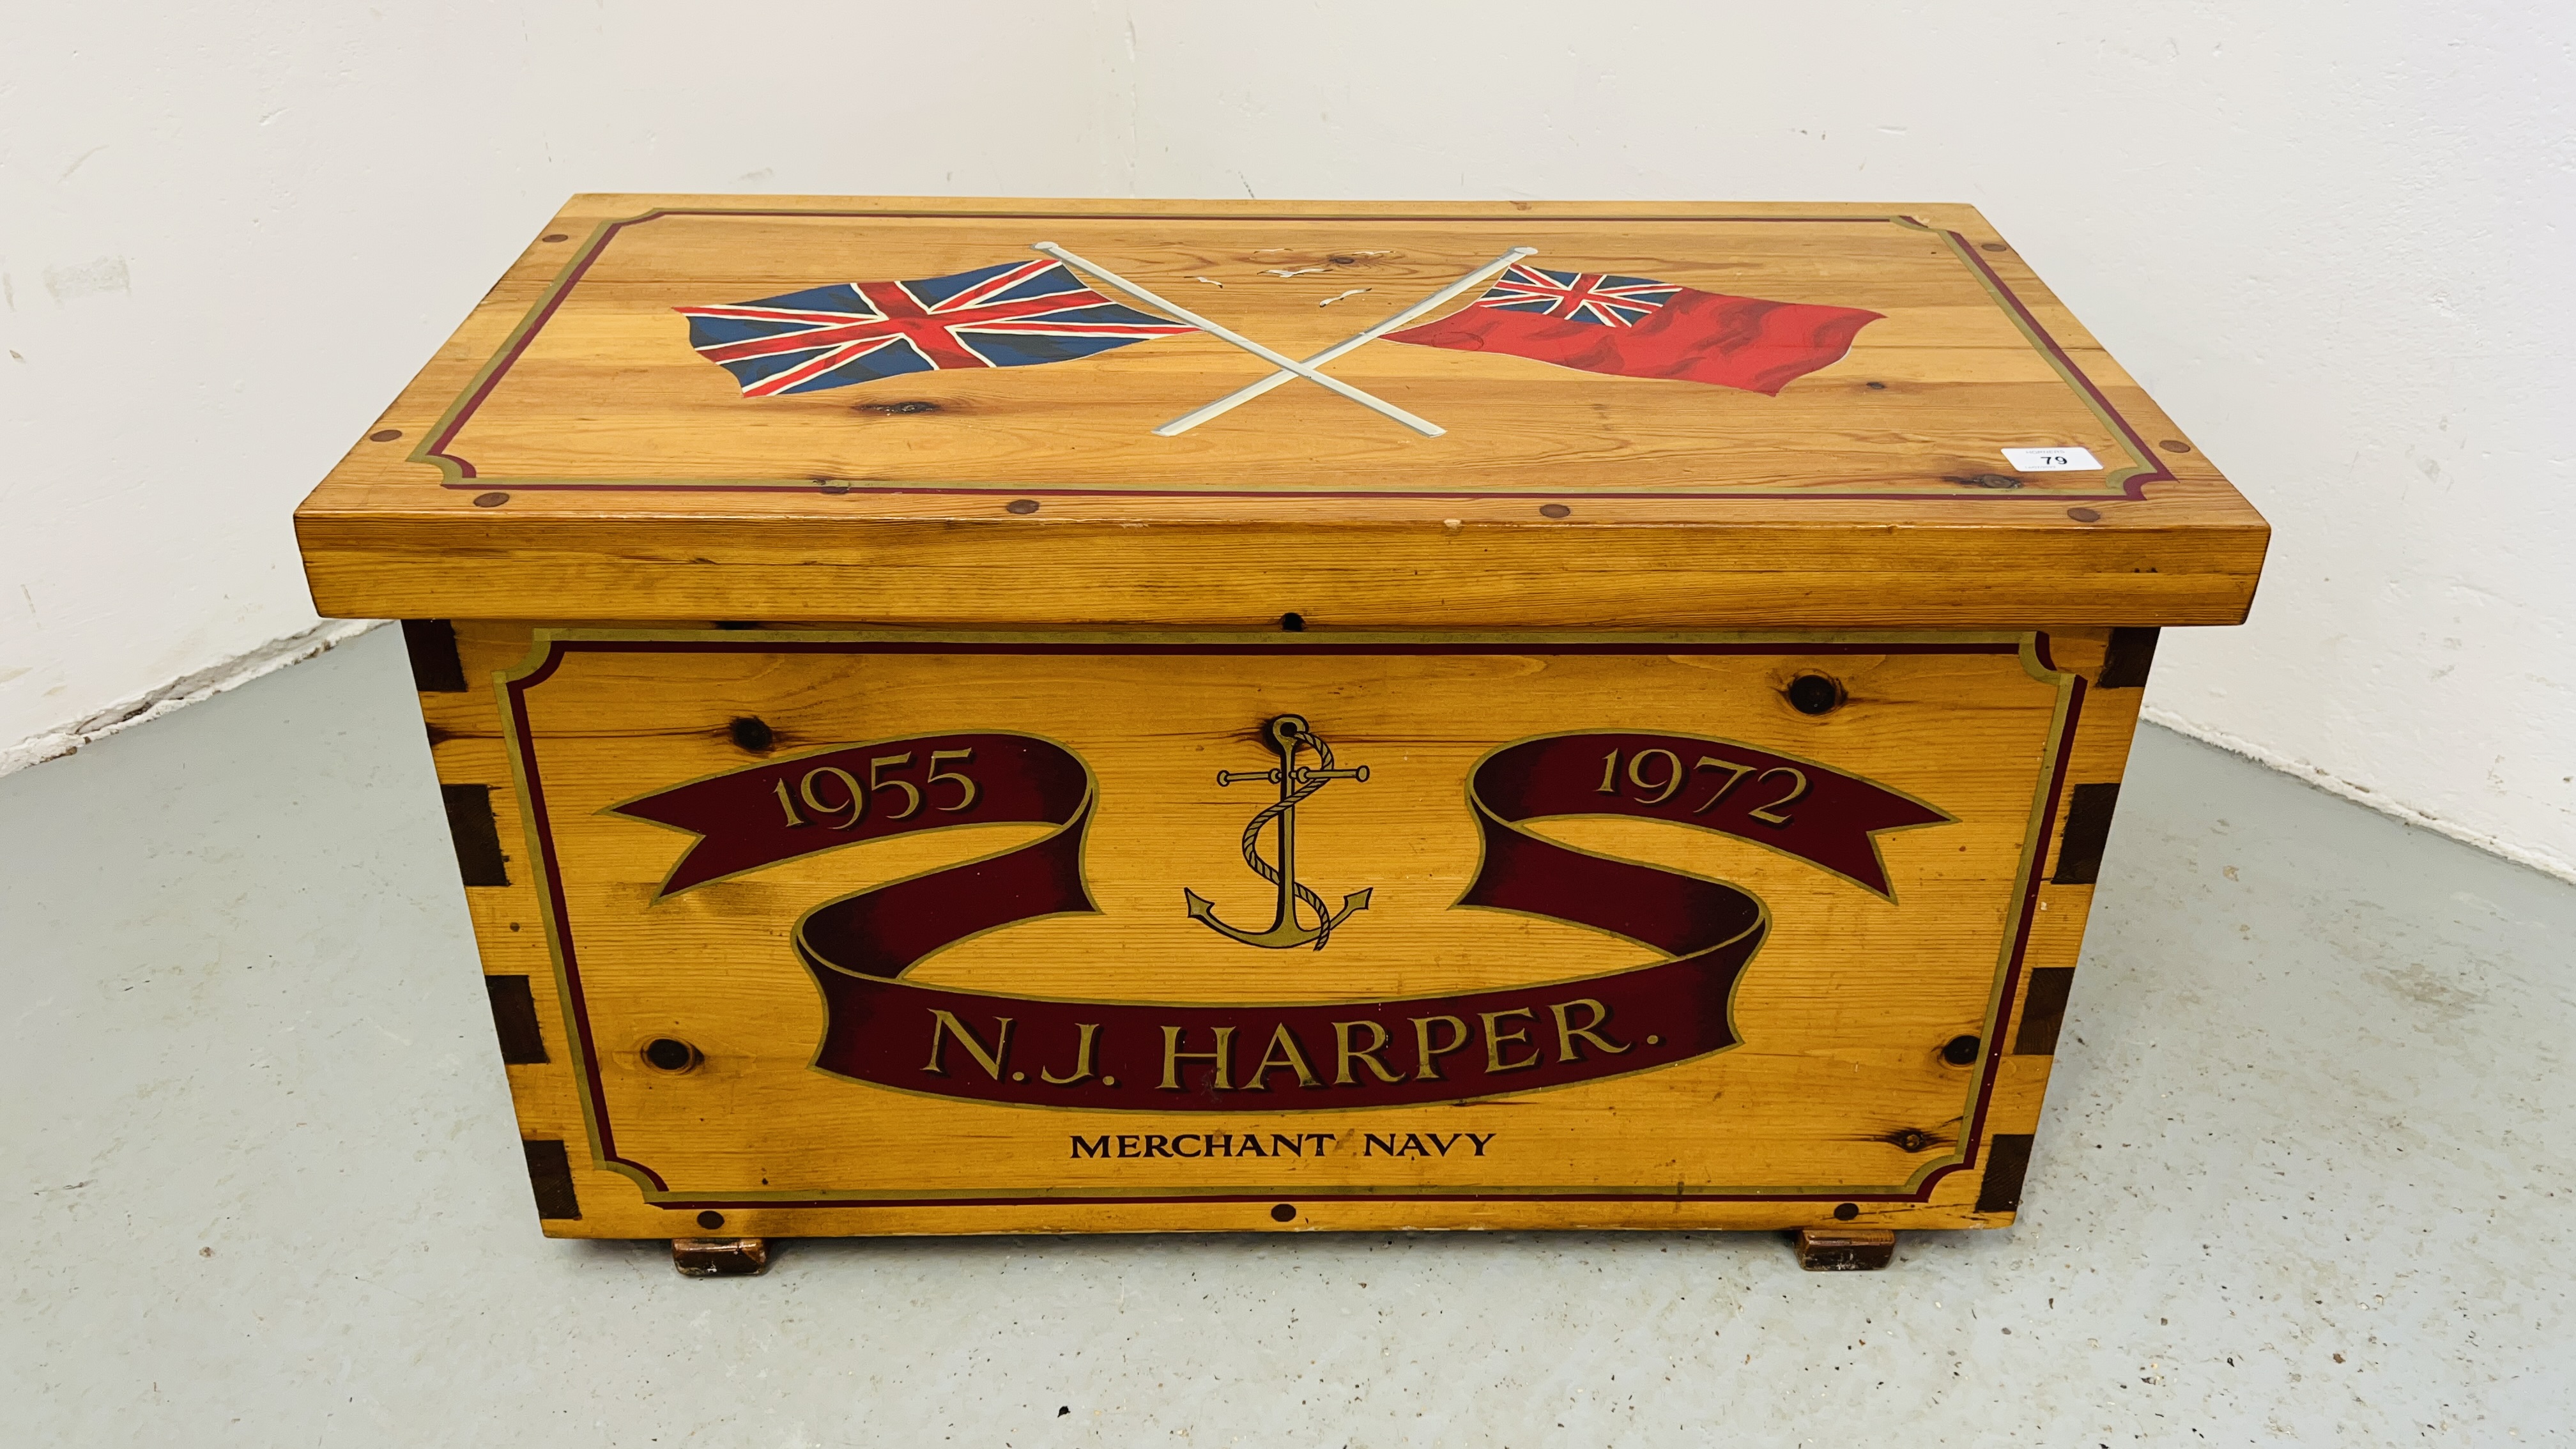 A WAXED PINE REPRODUCTION SEAMANS KIT BOX COMPLETE WITH BECKETT HANDLES AND UNION JACK FLAGS